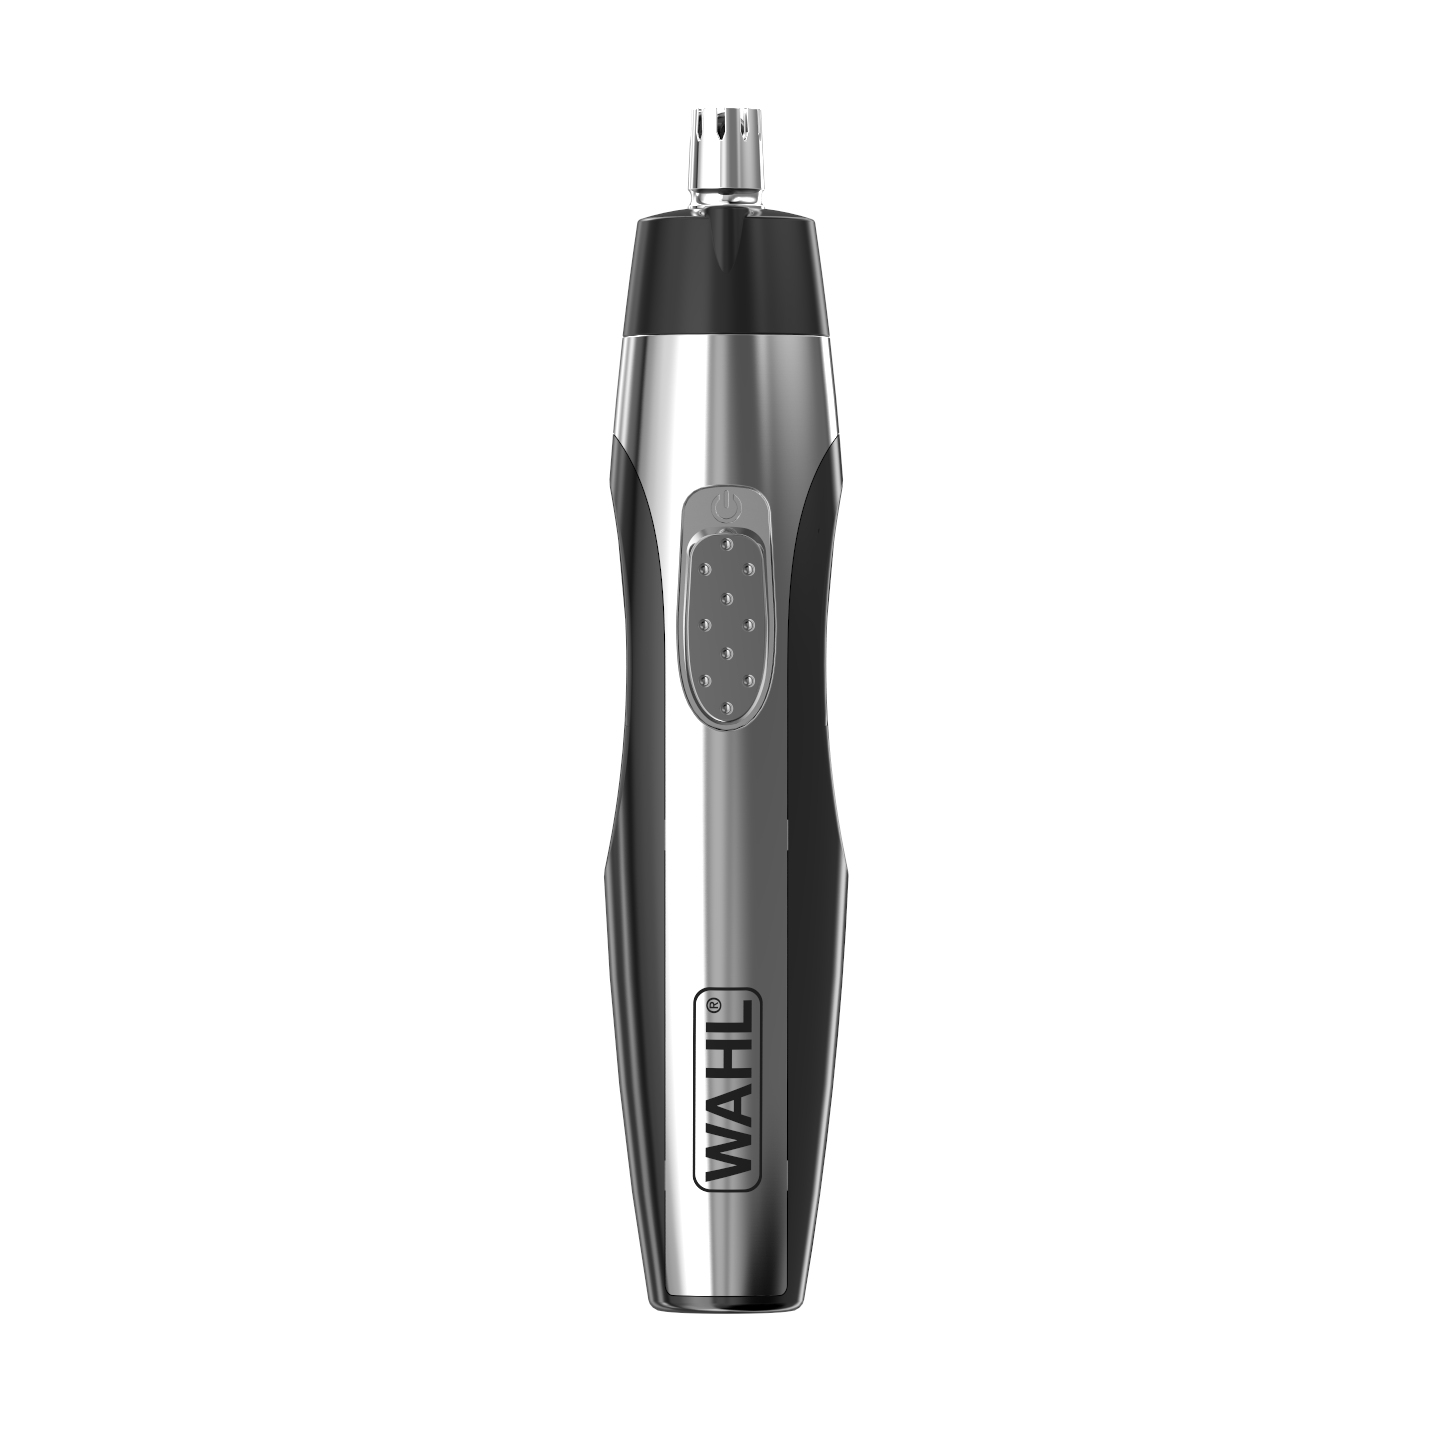 wahl trimmer nose attachment